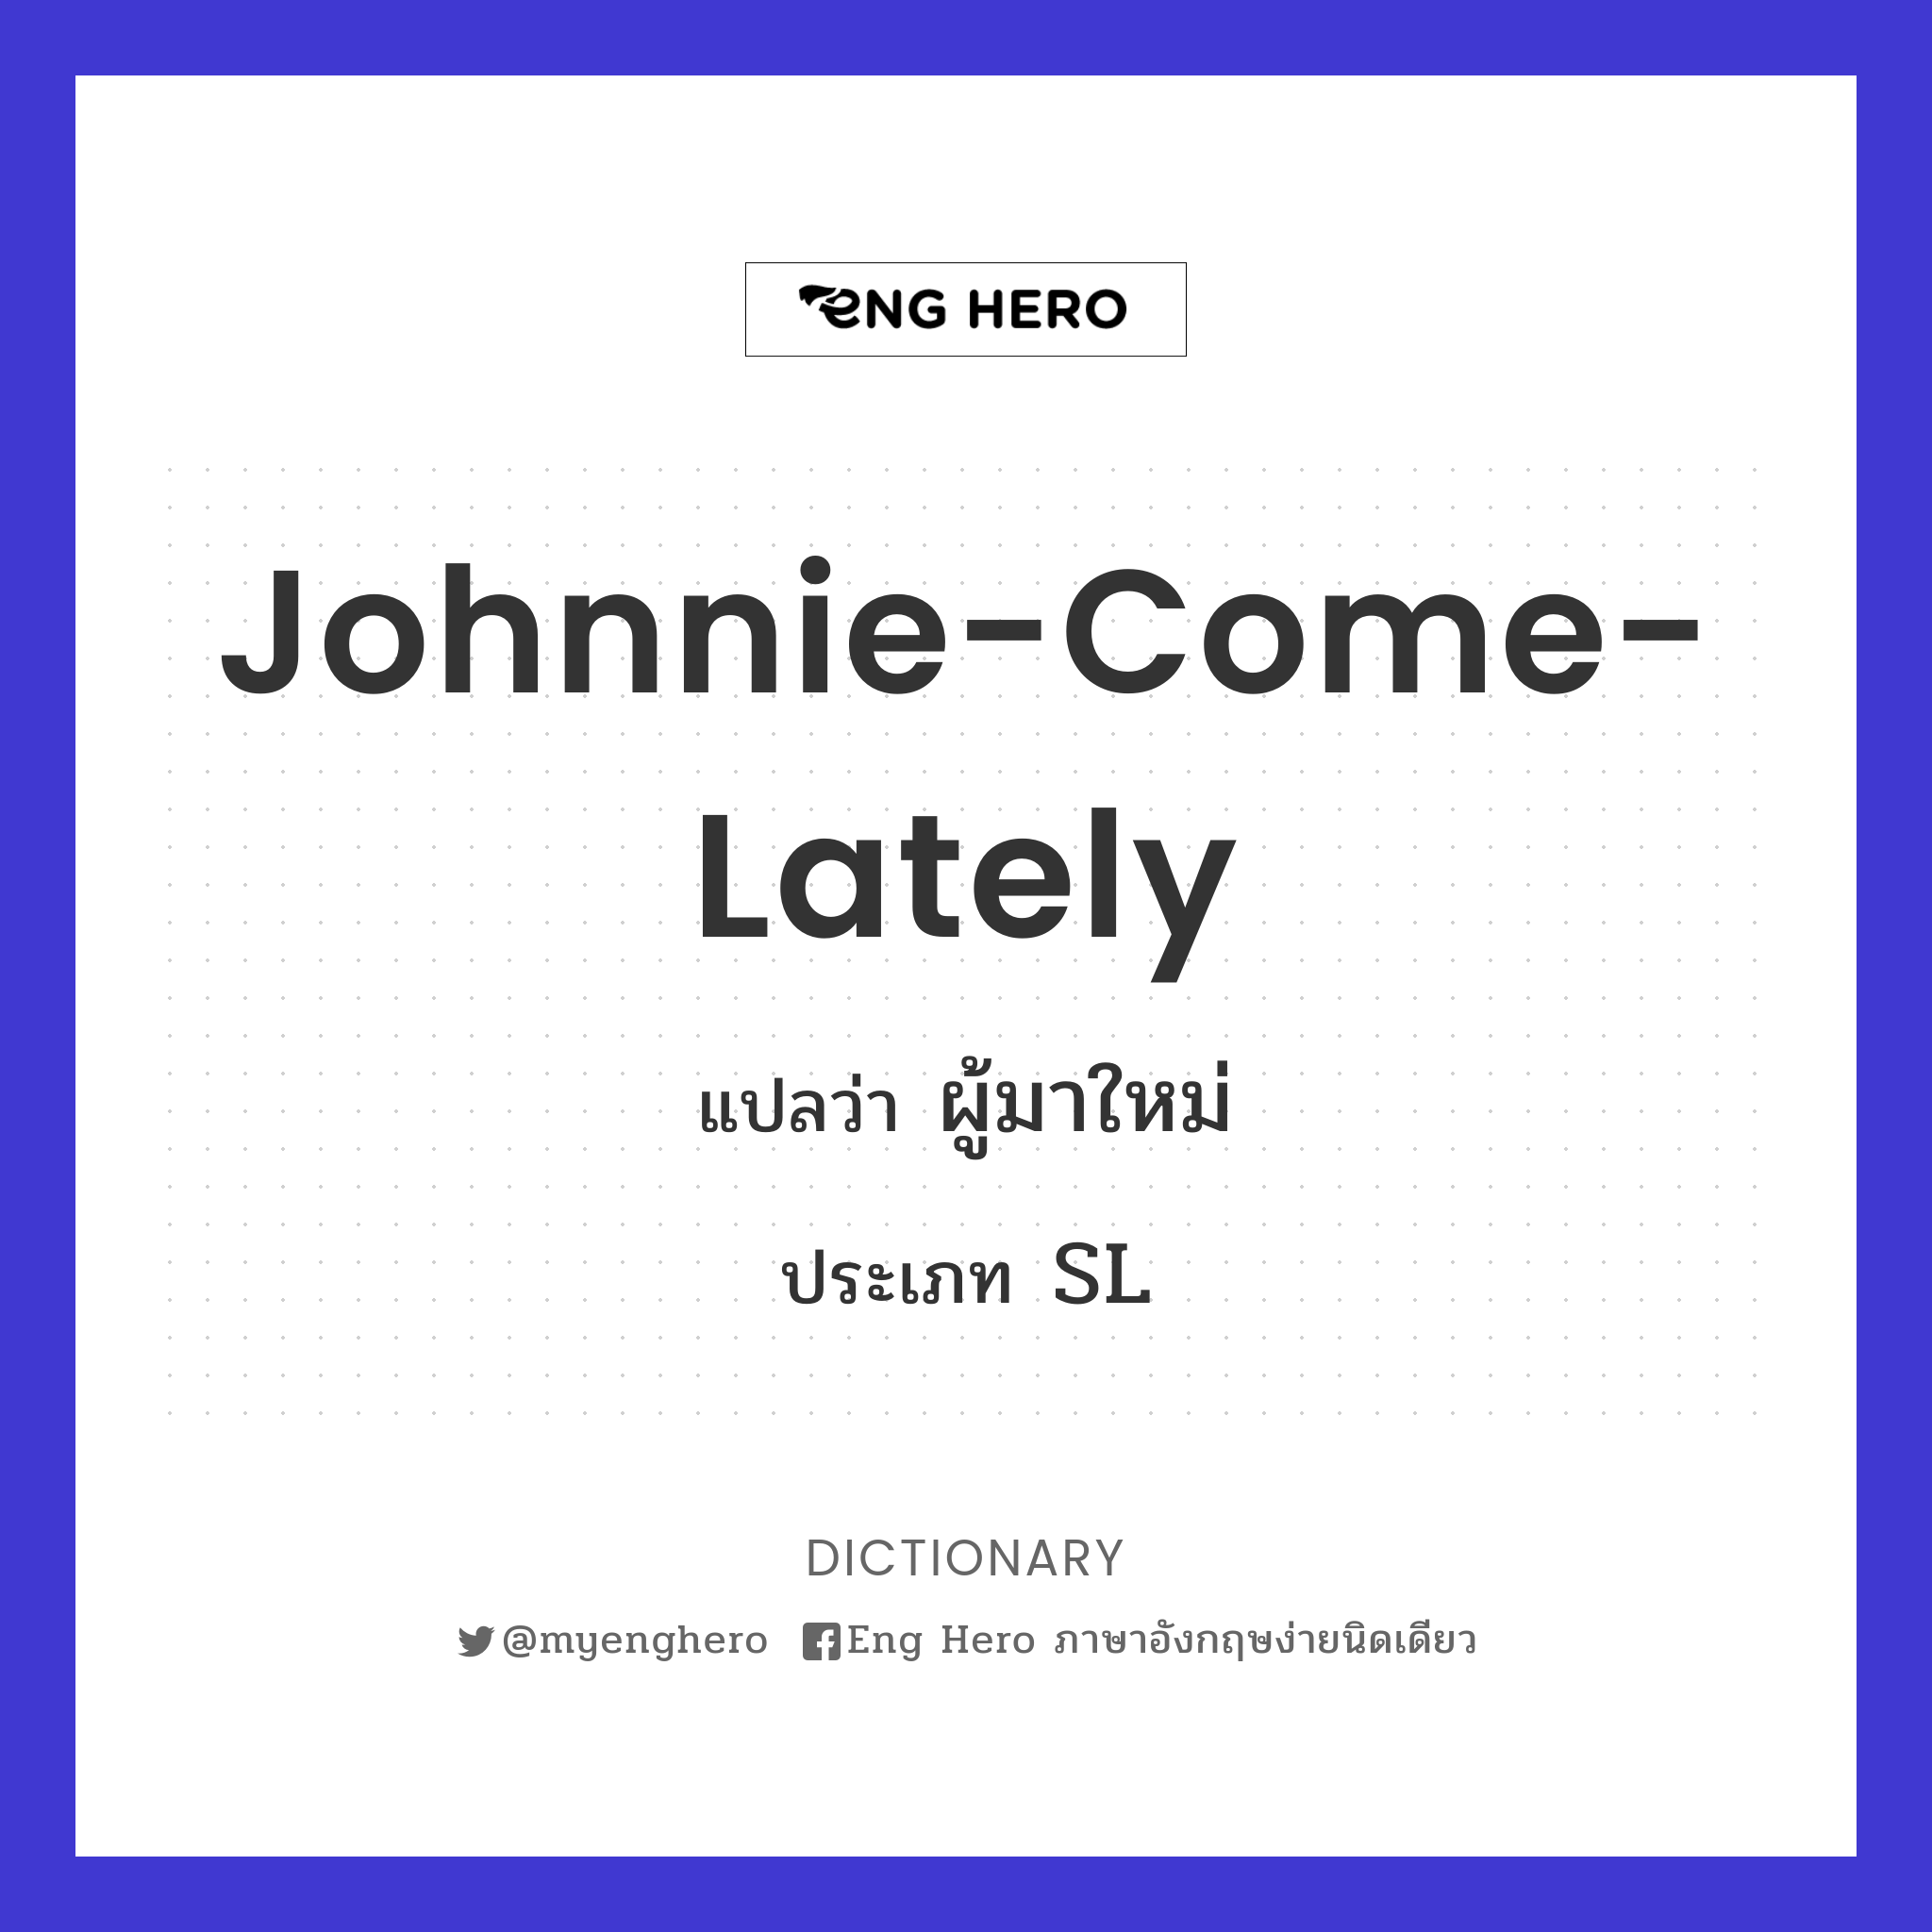 Johnnie-come-lately